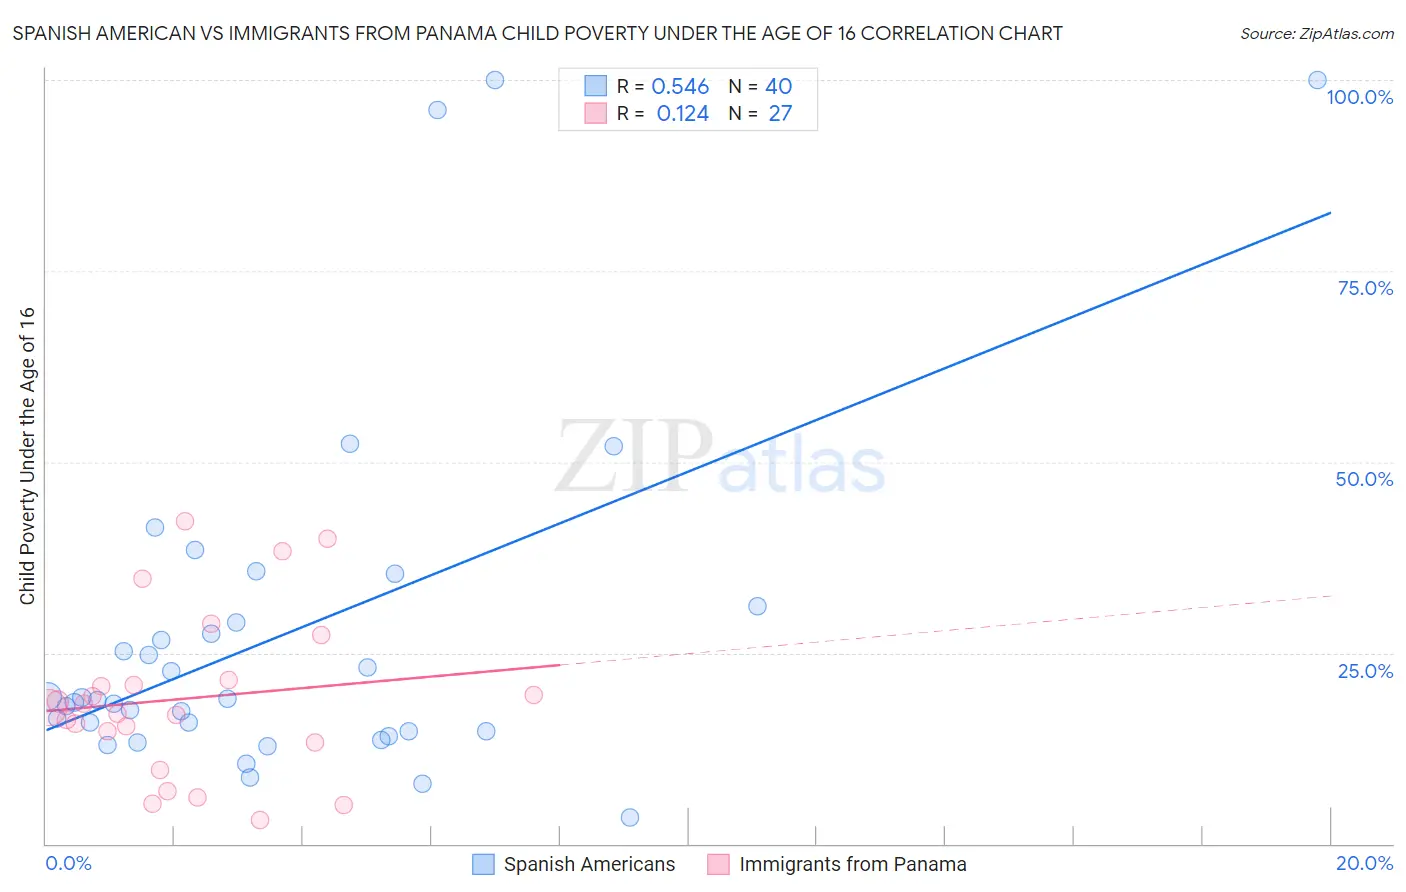 Spanish American vs Immigrants from Panama Child Poverty Under the Age of 16